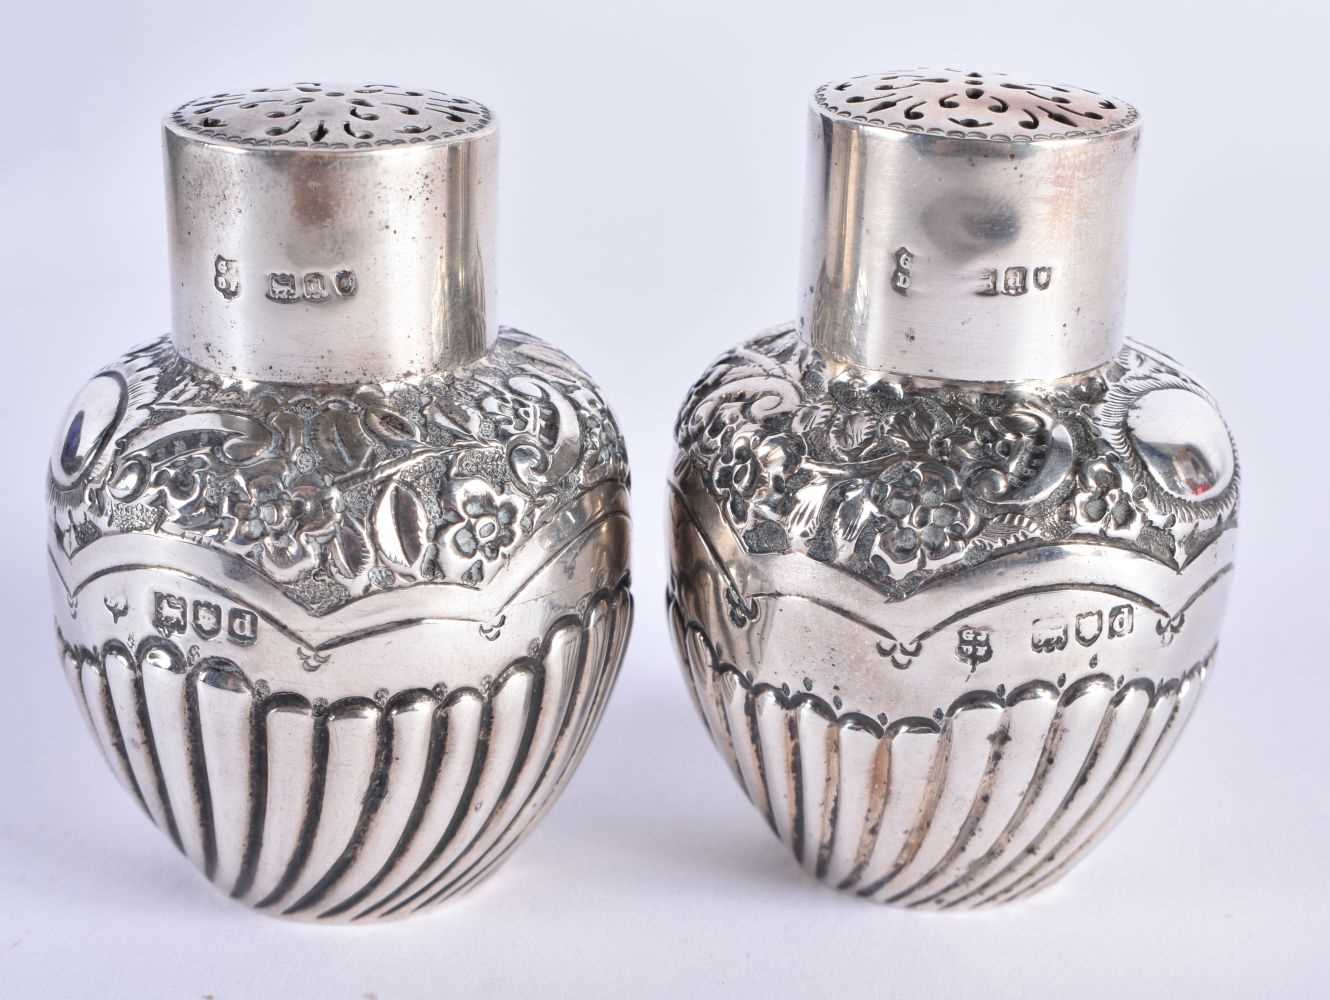 A CASED PAIR OF SILVER CONDIMENTS. London 1899. 71.4 grams. 6 cm x 4.5 cm. - Image 2 of 4